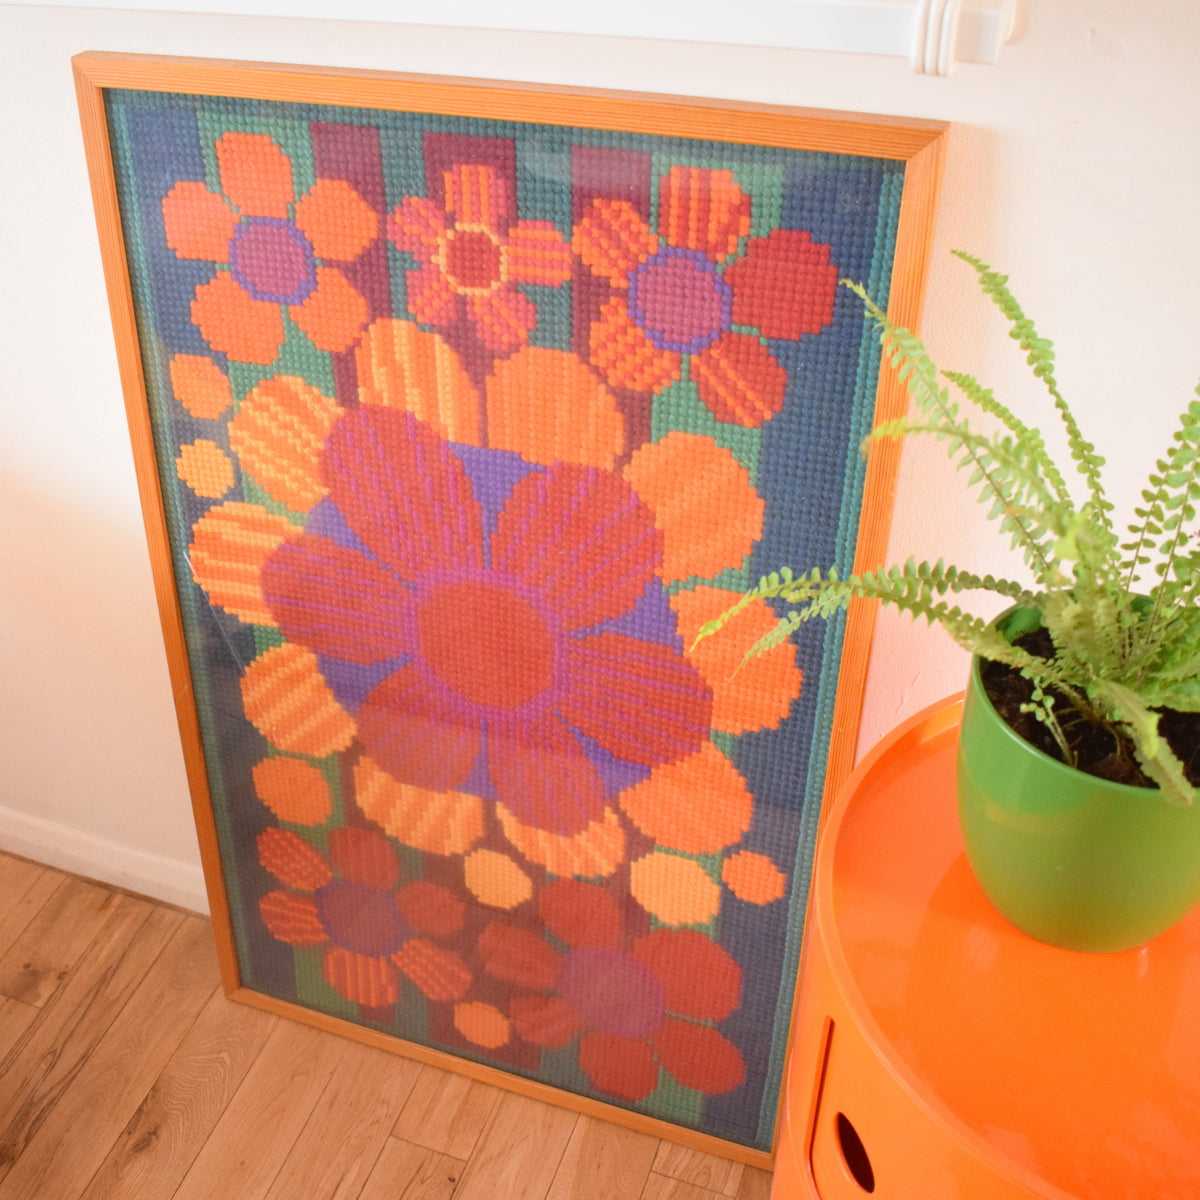 Vintage 1960s Fantastic Large Swedish Embroidery Picture - Flower Power